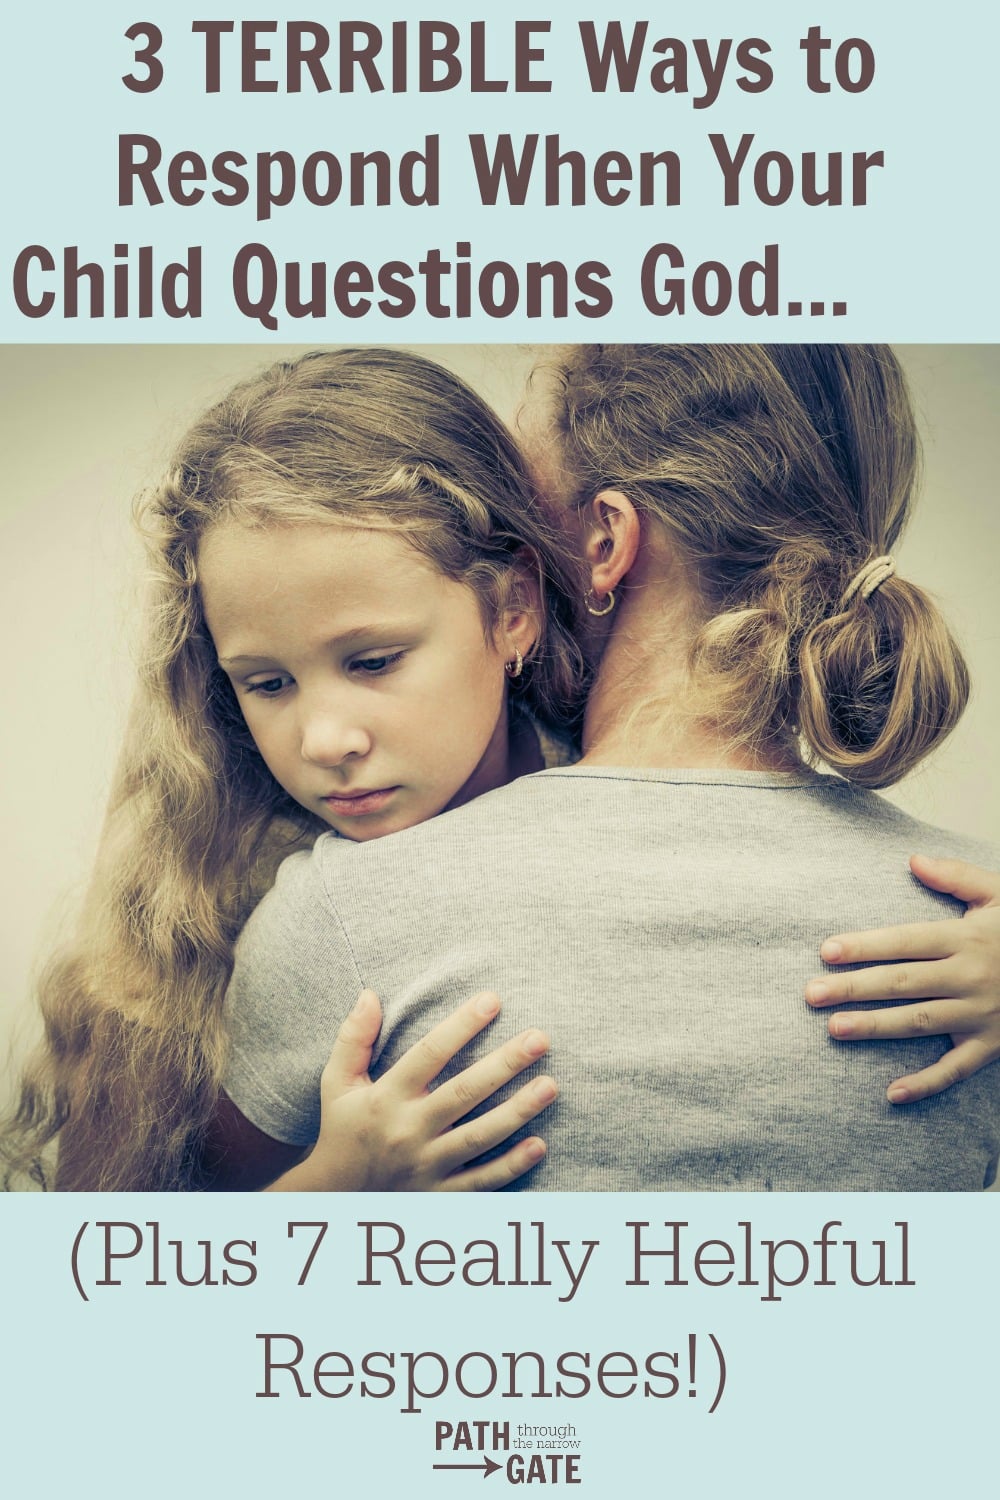 How would you respond if your child doubted God? Here are 3 TERRIBLE ways to respond when your child questions God, and 7 Responses that are really HELPFUL.